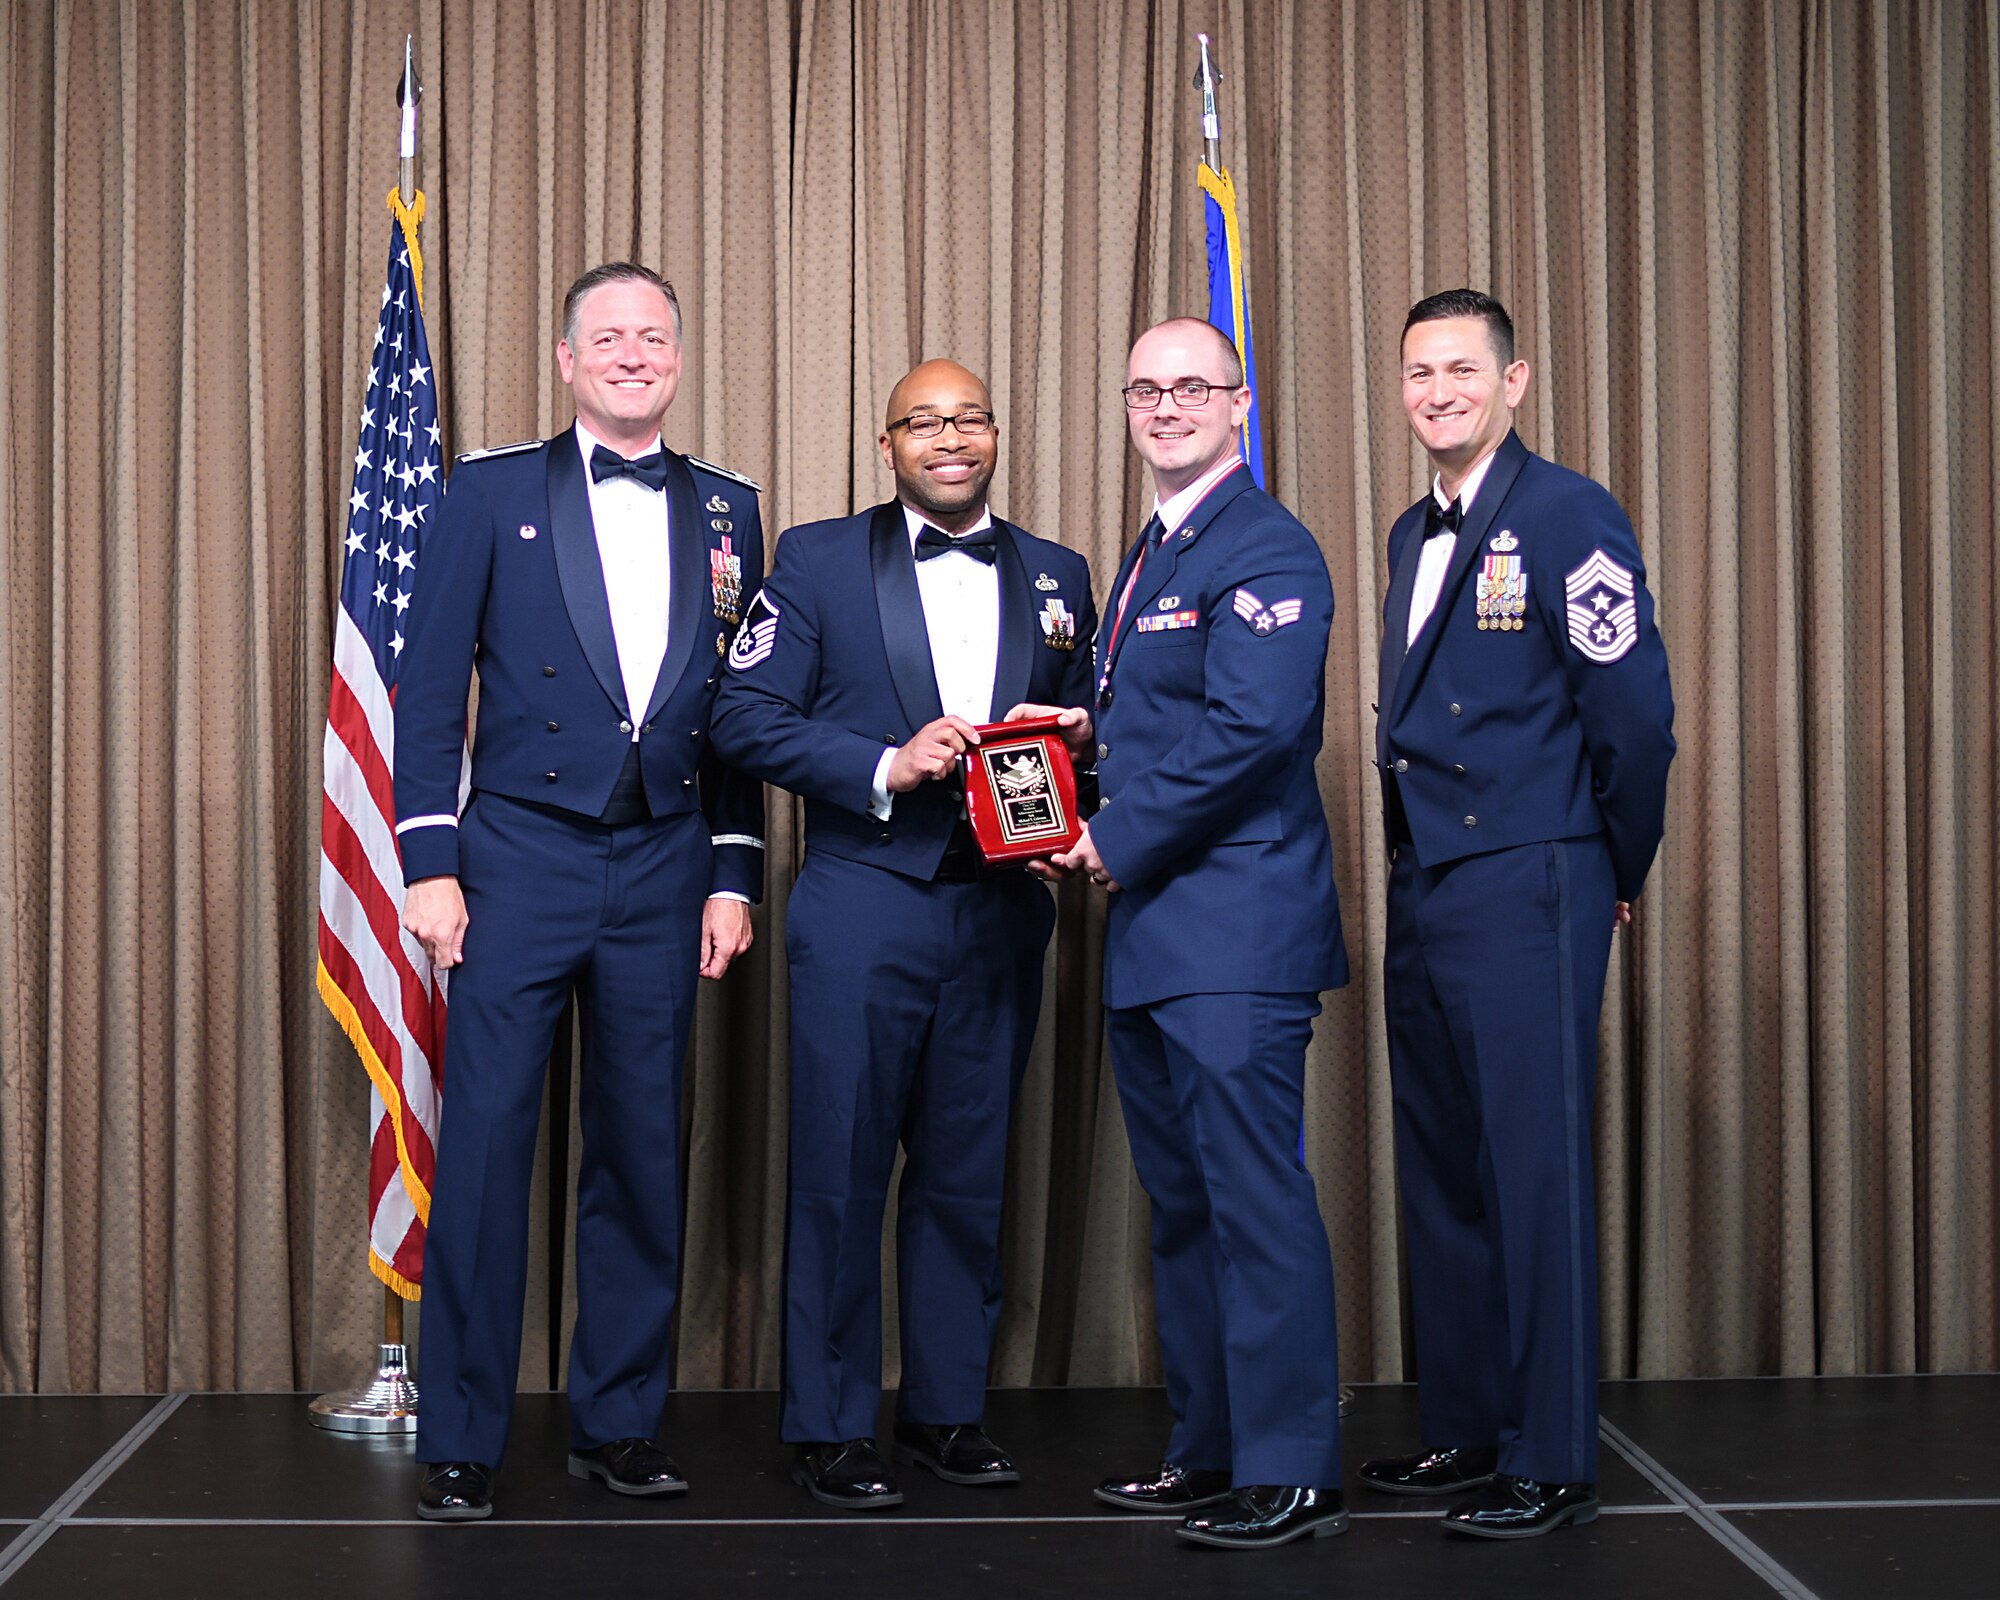 MSgt Kevin Davis, Air Force Sergeants Association representative, presents Academic Acheivement Award to SrA Michael Coleman, Etchberger Airman Leadership School graduate, June 20, 2019, on Grand Forks Air Force Base, North Dakota. ALS graduation is the culmination of the first level of the Enlisted Professional Military Education continuum directed toward preparing upcoming noncommissioned officers with leadership skills for their careers. (U.S. Air Force photo by Senior Airman Elijaih Tiggs)